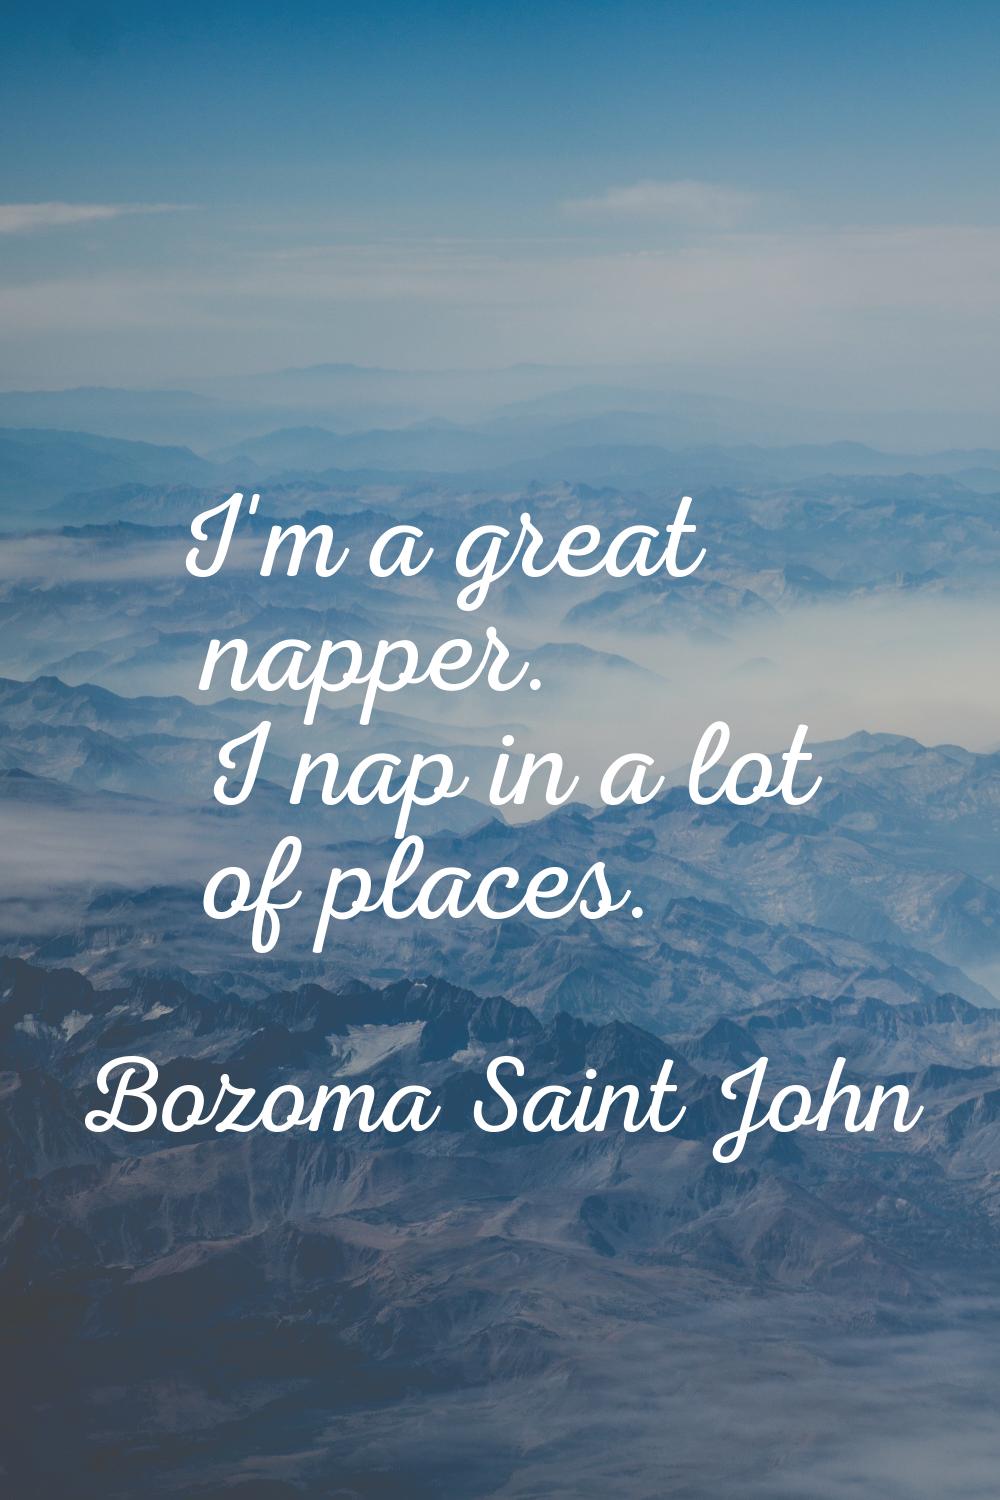 I'm a great napper. I nap in a lot of places.